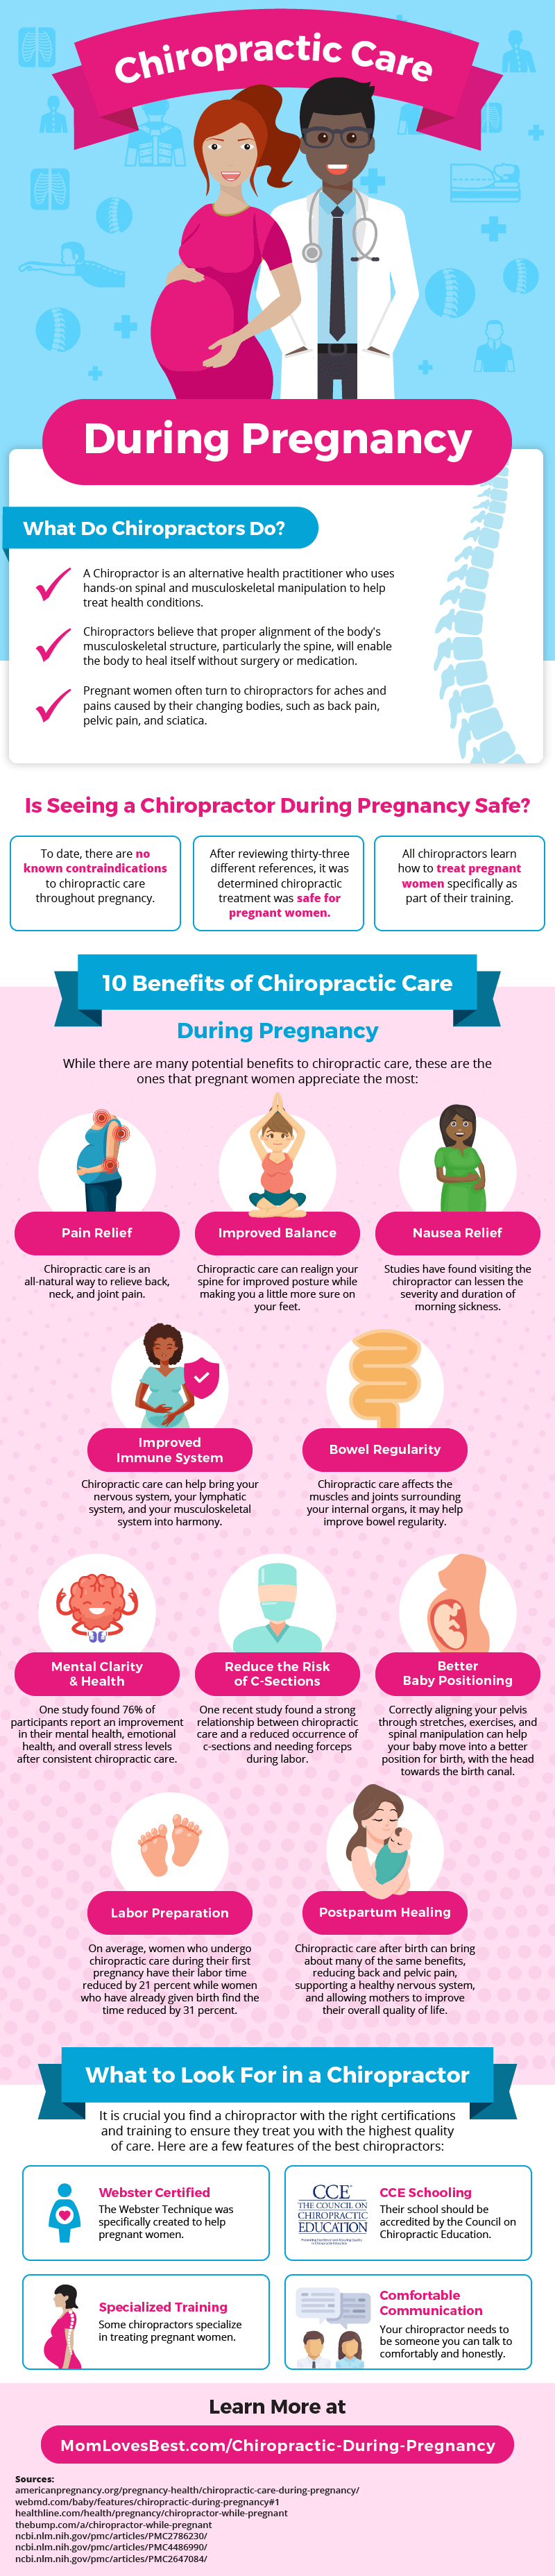 Chiropractic During Pregnancy Infographic - Is it Safe to See the Chiropractor While I’m Pregnant?